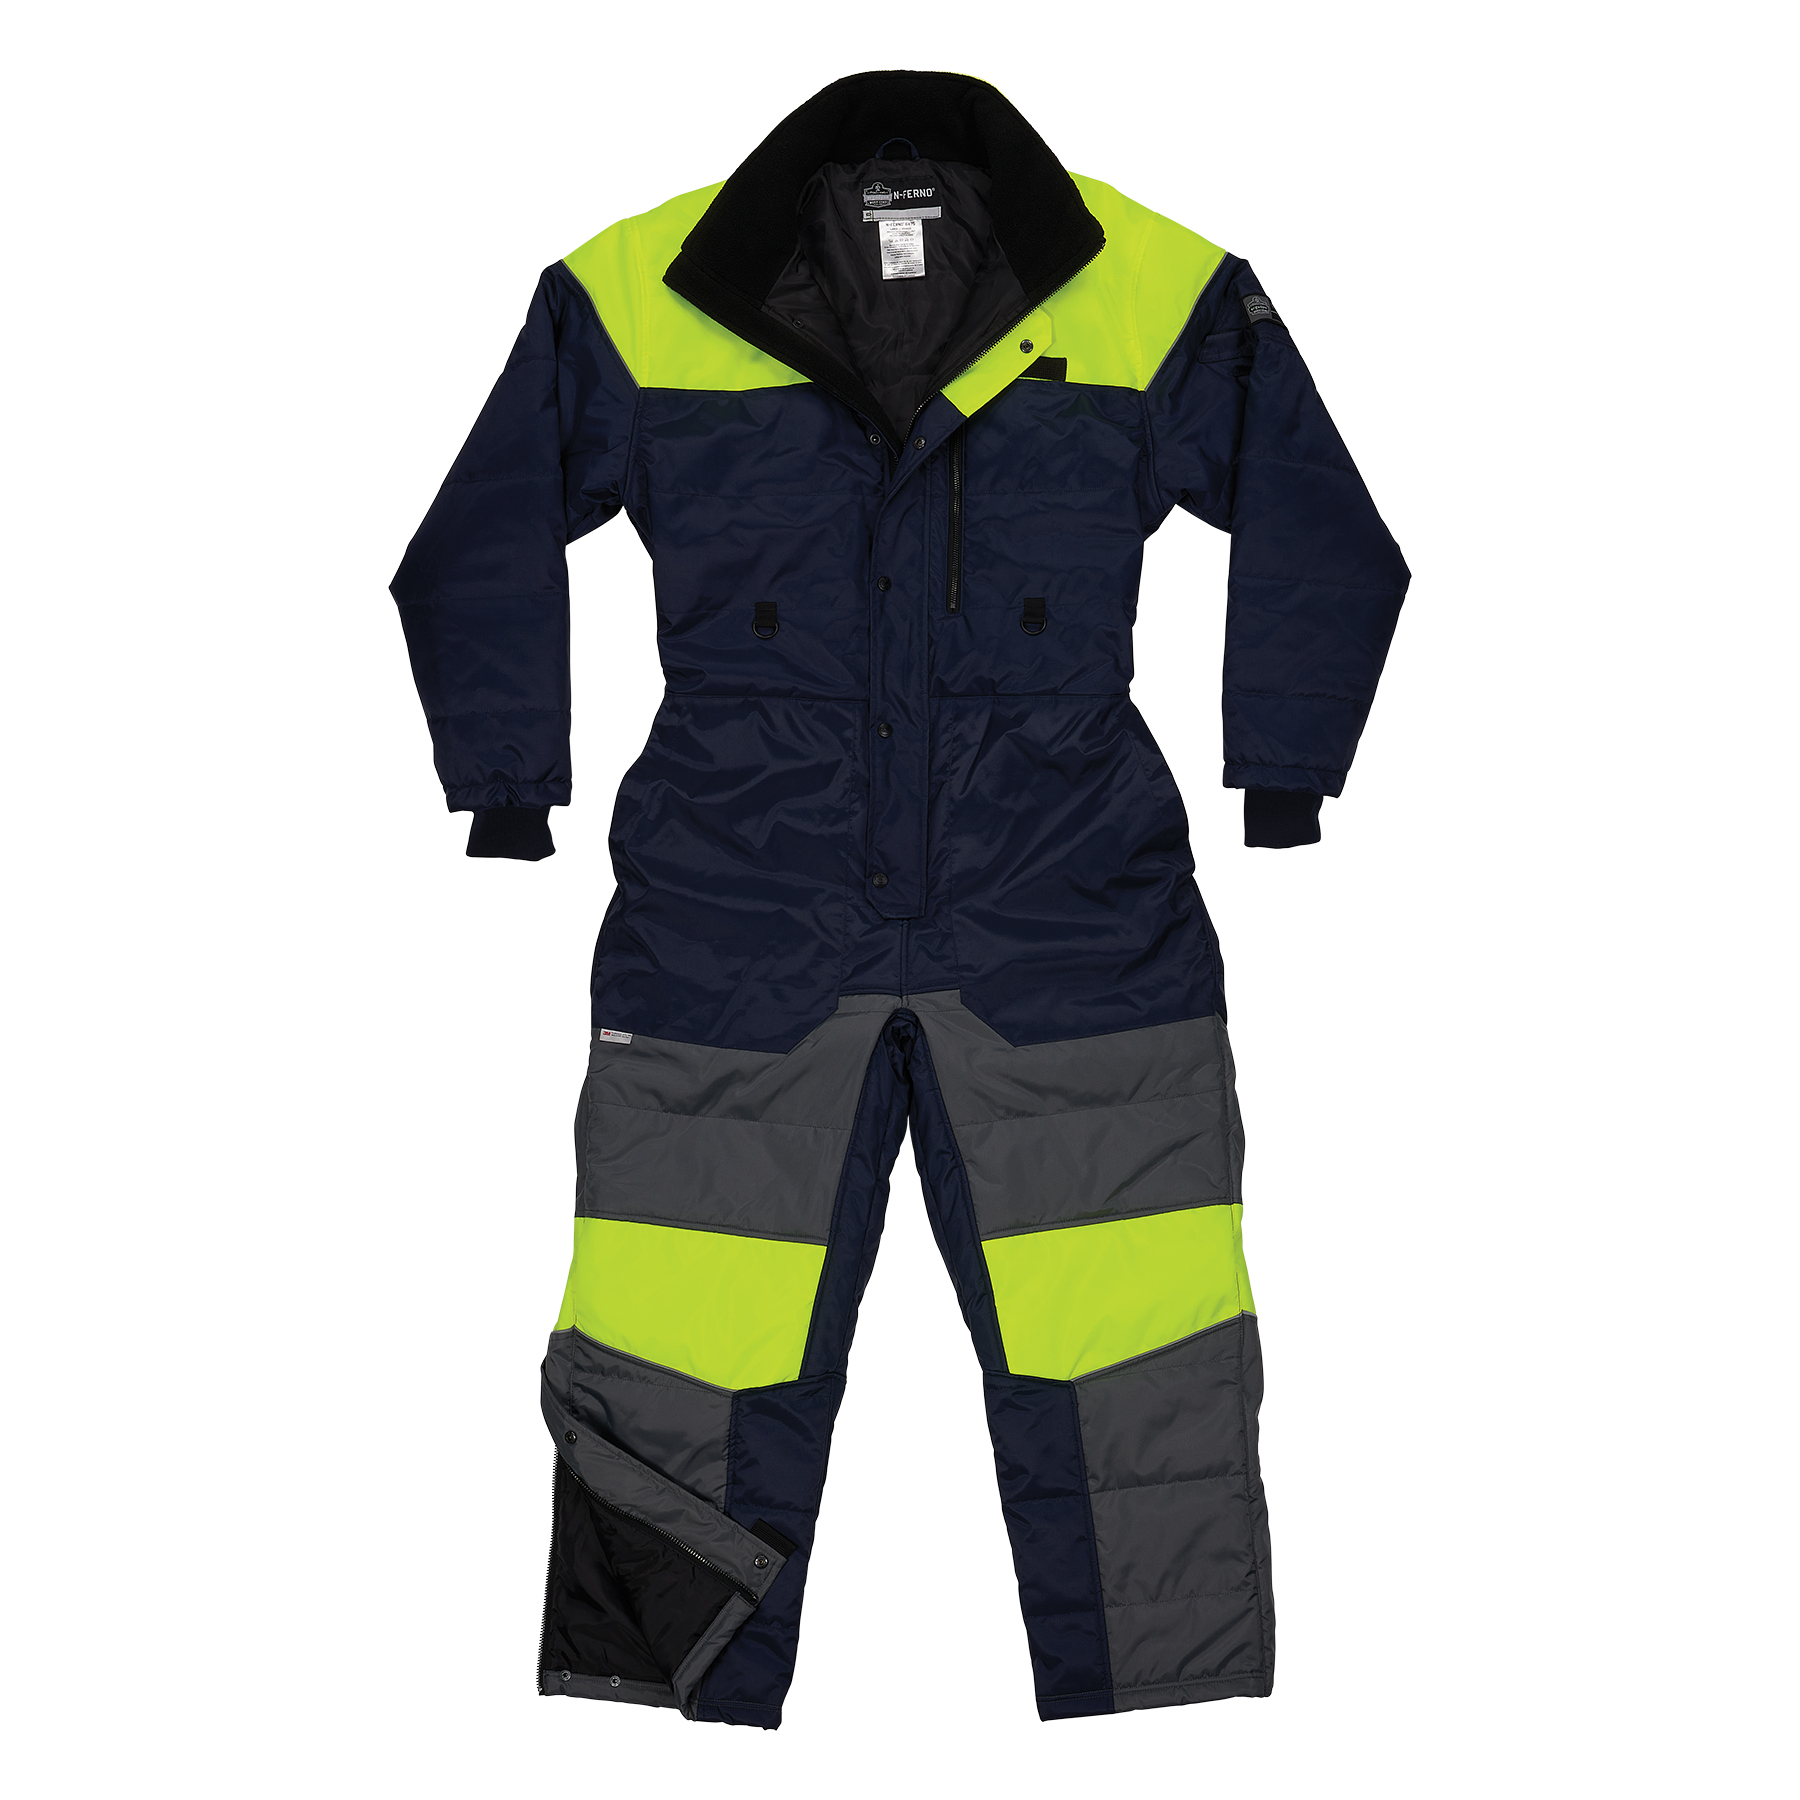 https://www.ergodyne.com/sites/default/files/product-images/6475-insulated-freezer-coveralls-front-navy.jpg